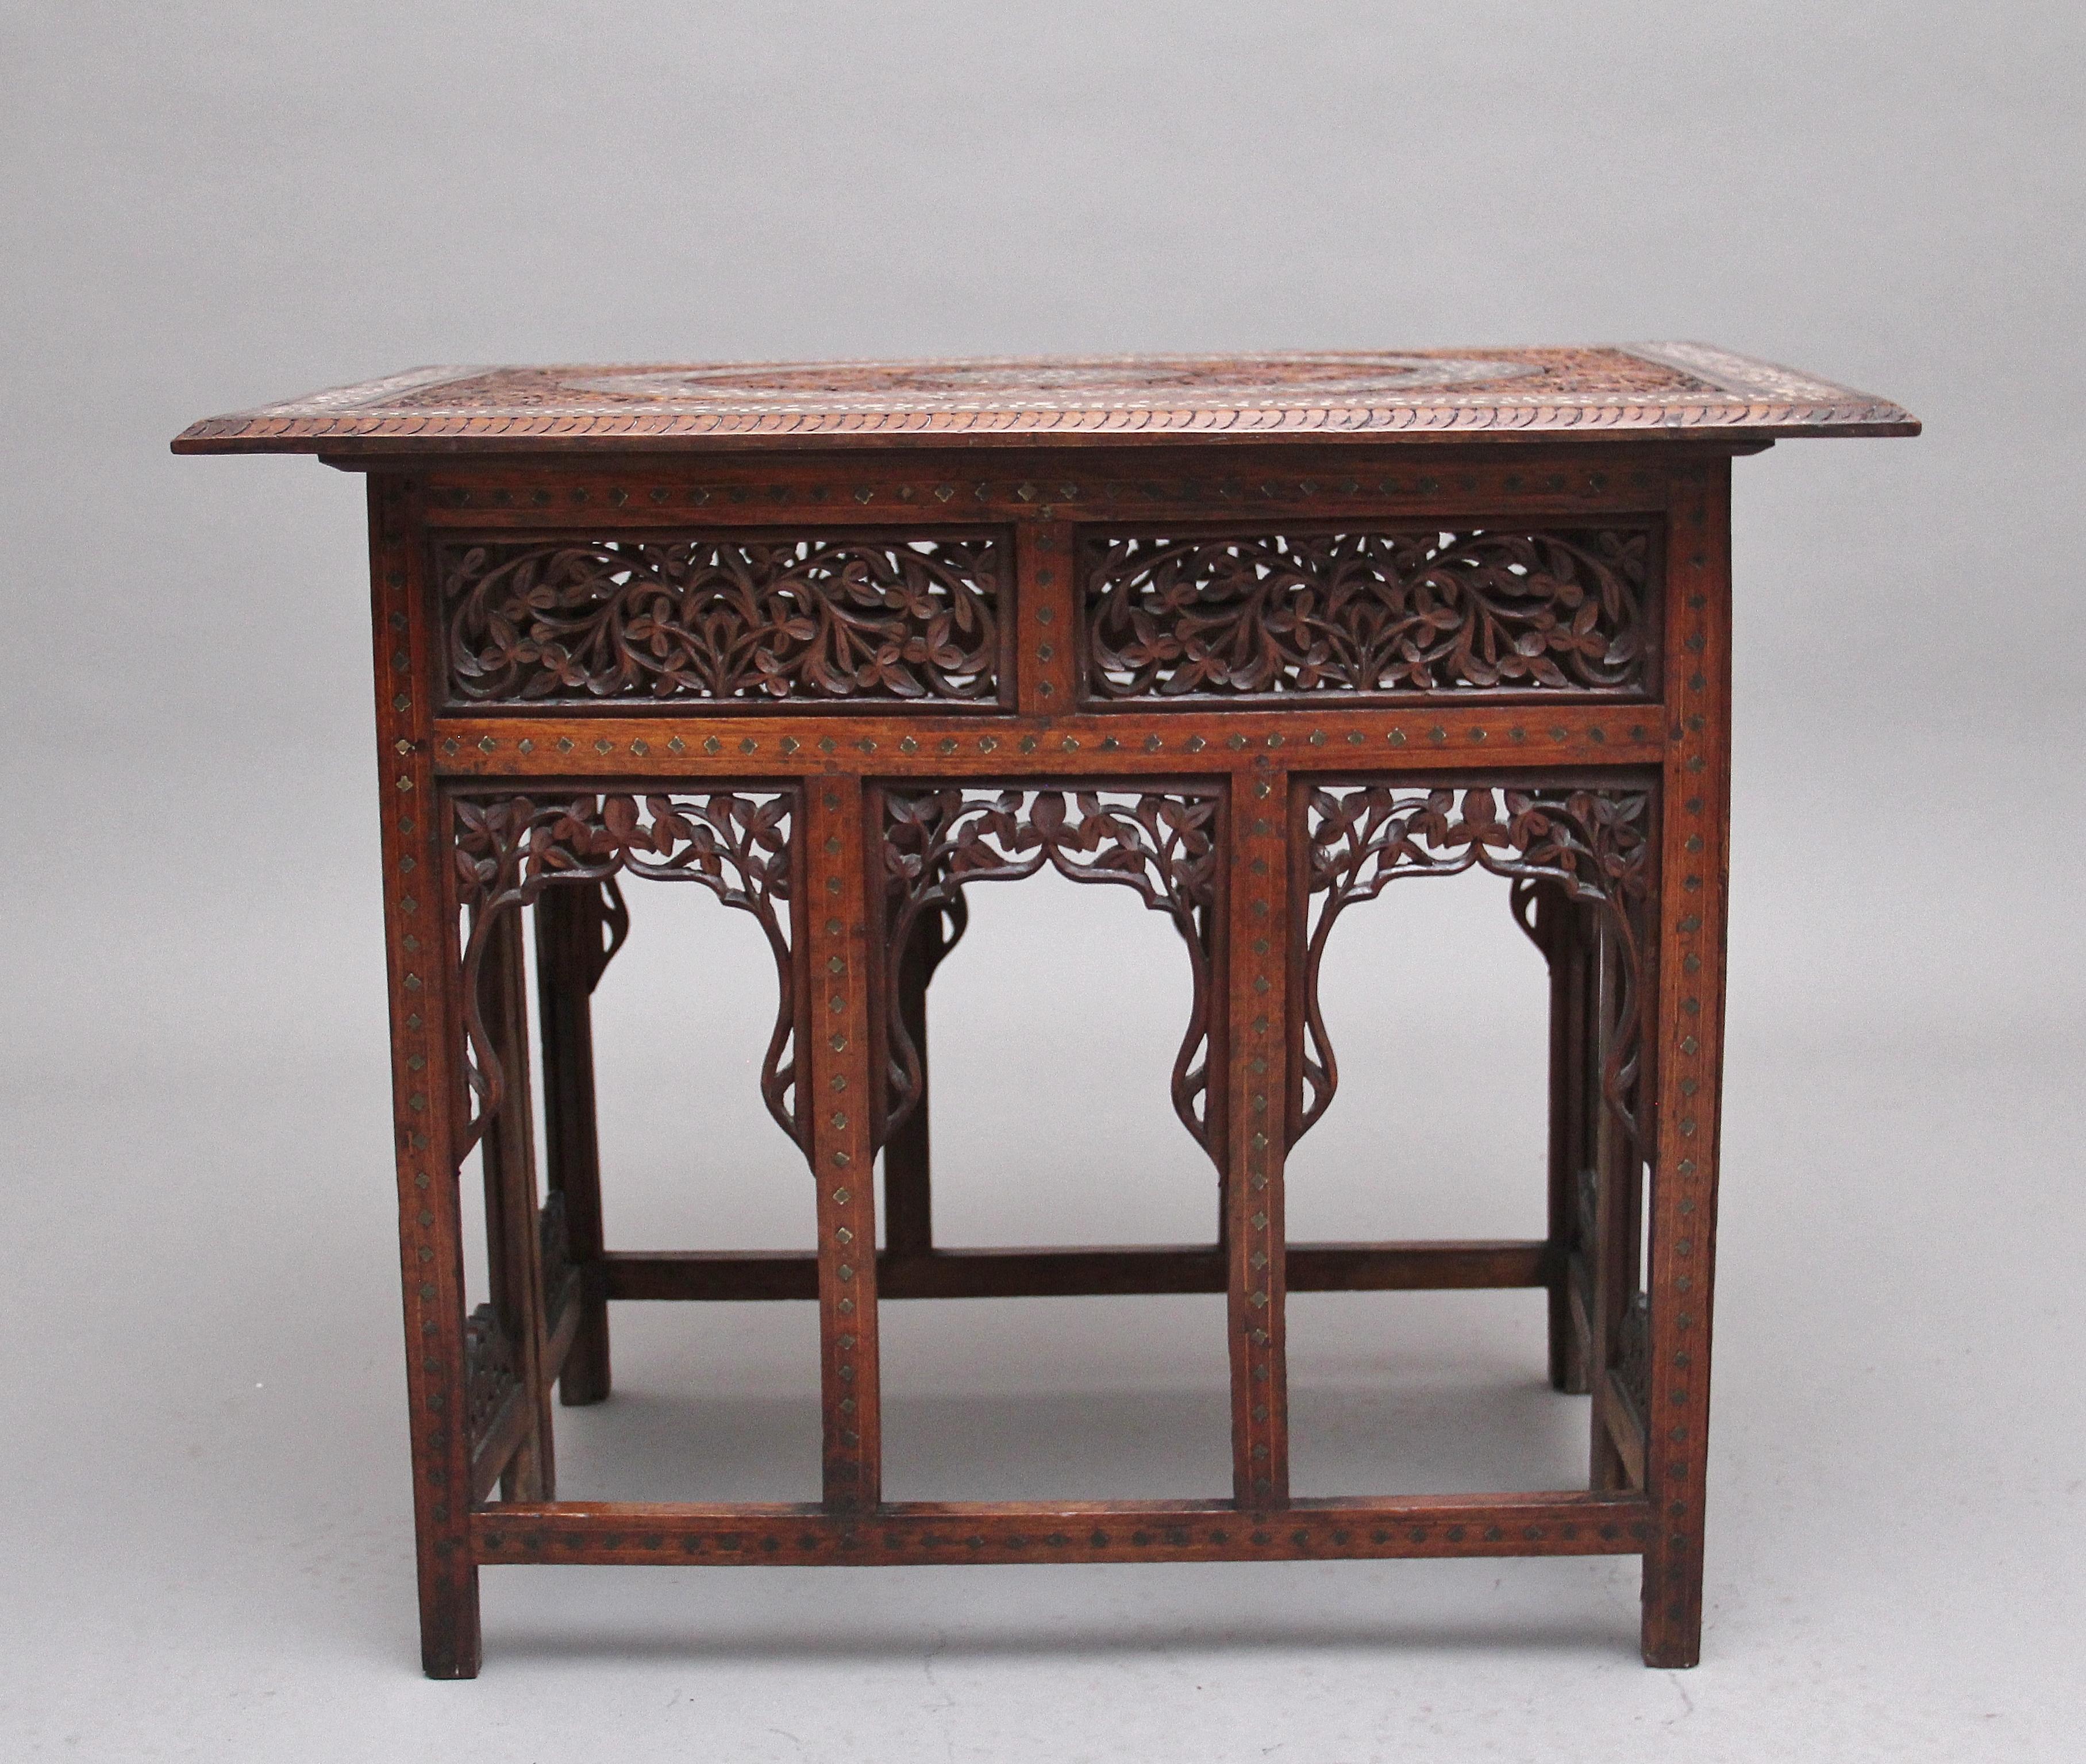 19th century Indian folding teak occasional table, the highly decorative and profusely carved top incorporating various vines and foliage, central oval border with bone inlay, carved moulded edge, the square base united with stretchers, the frieze